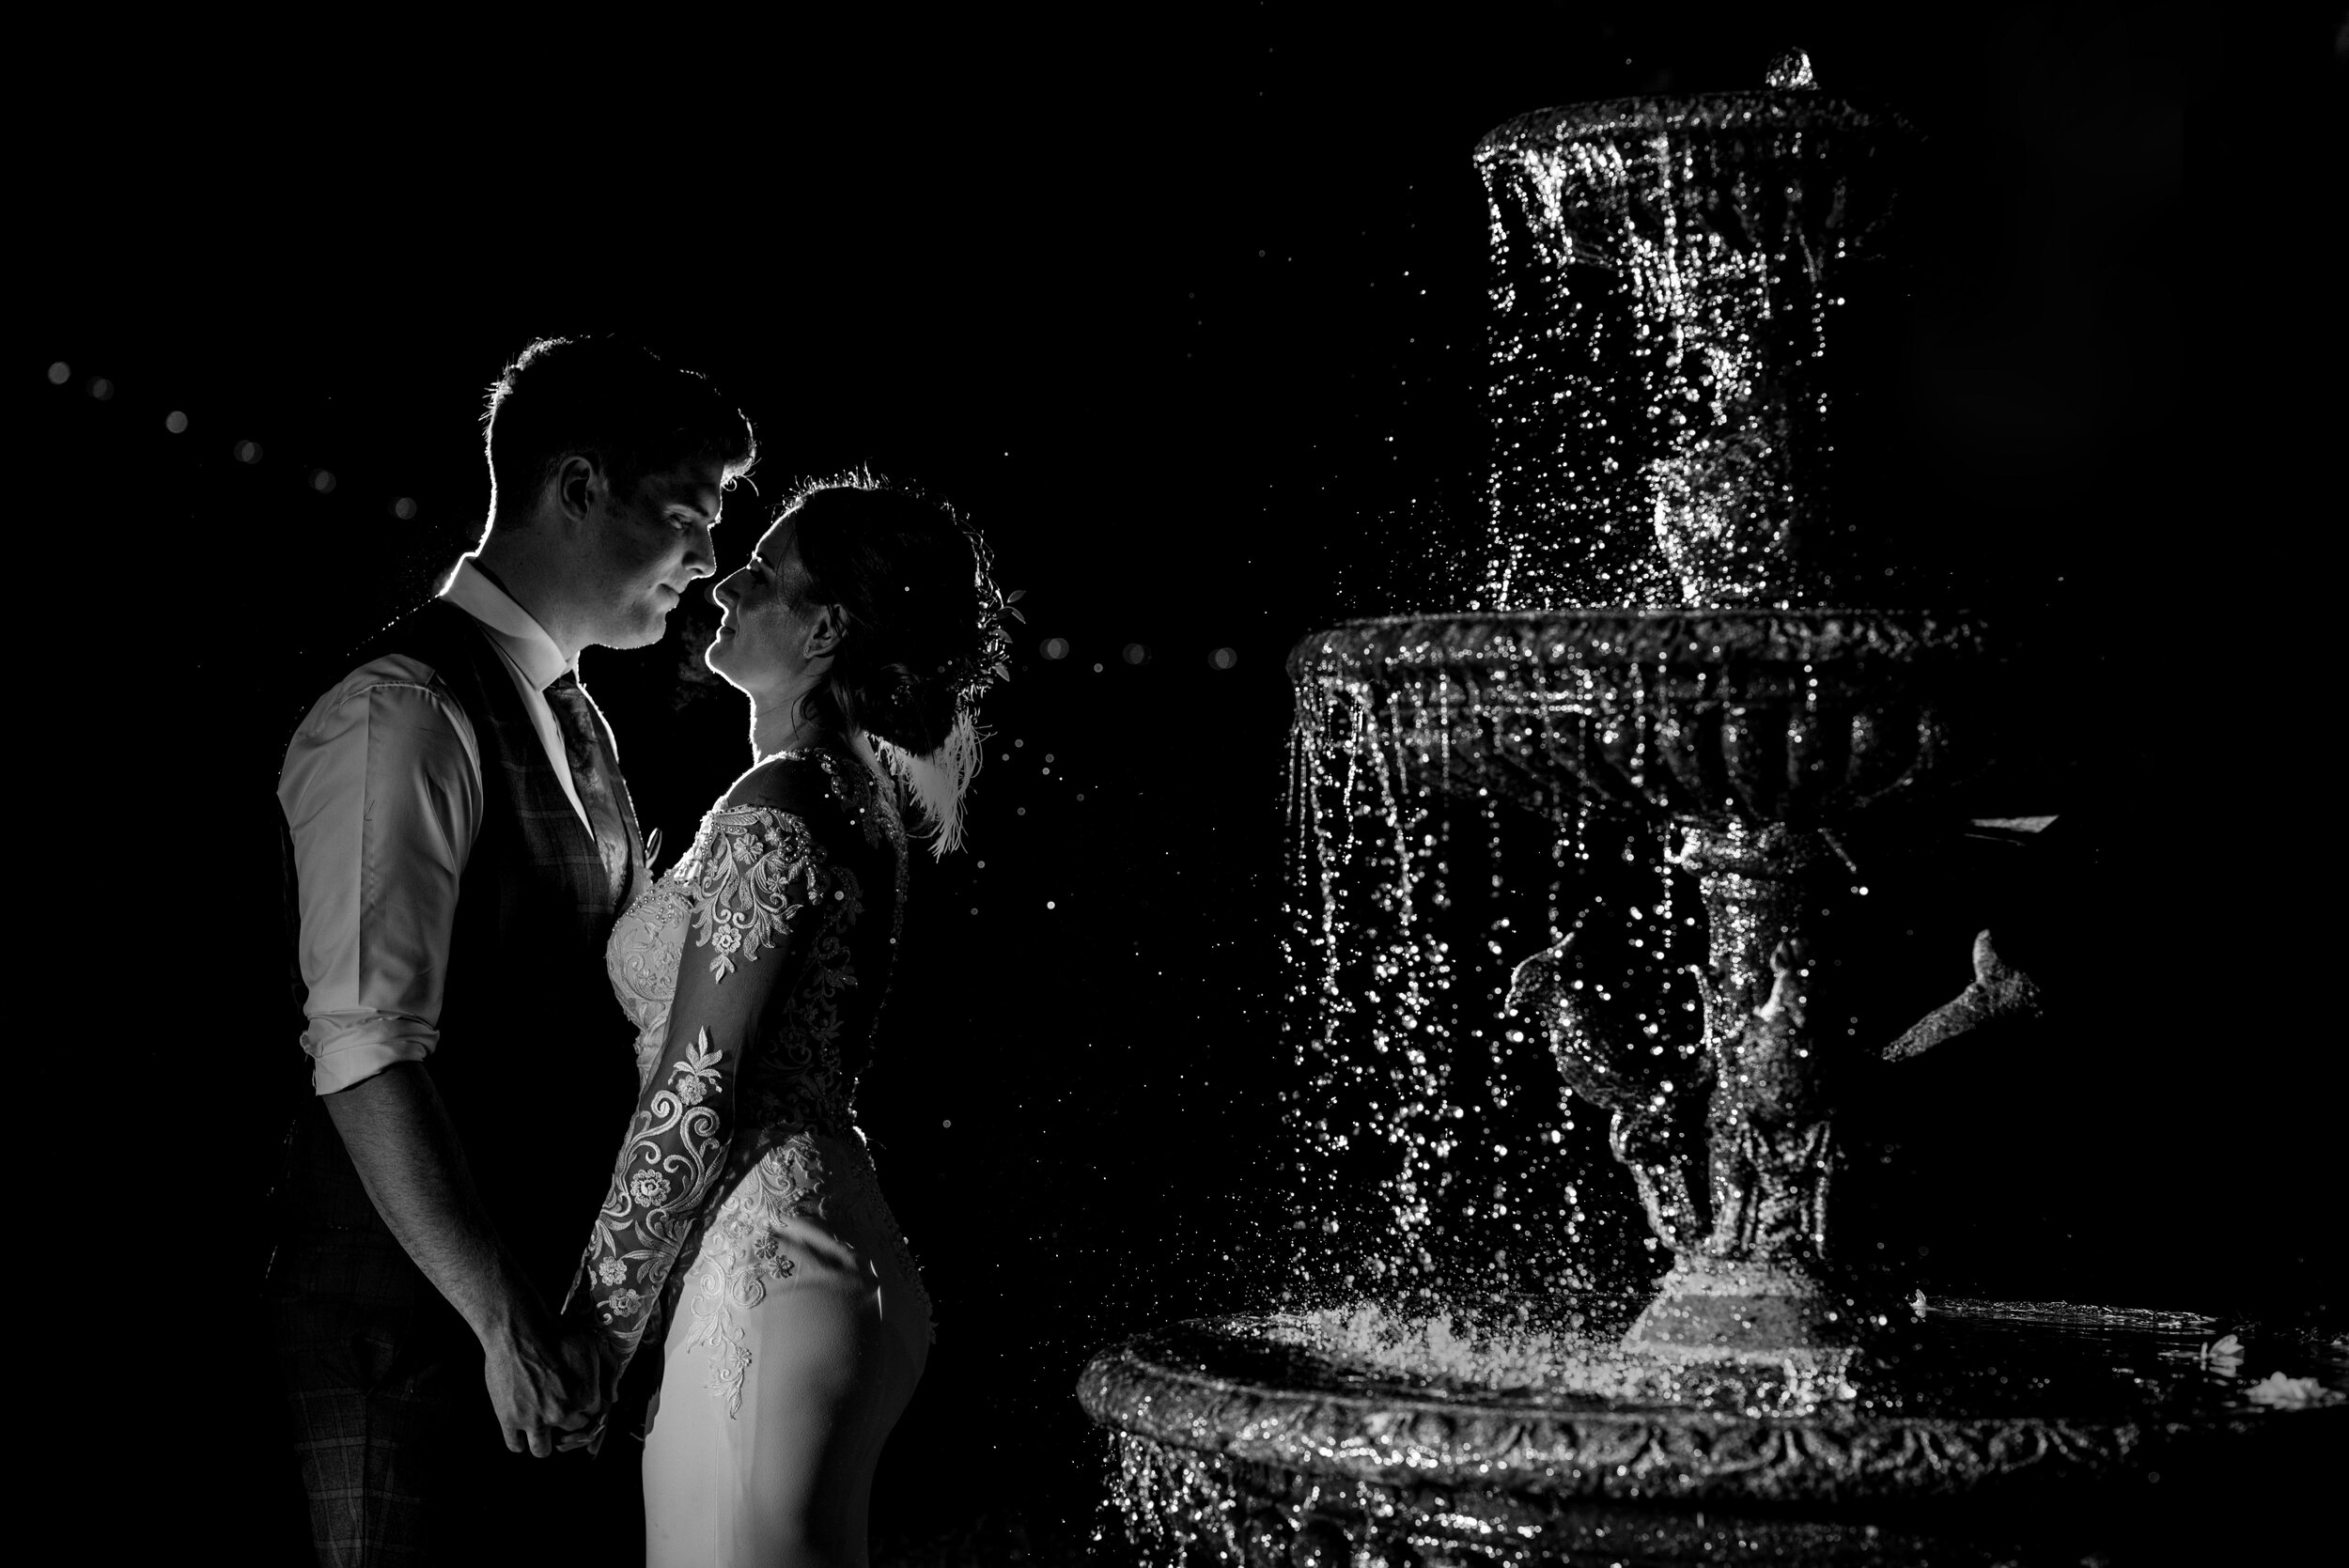 Backlit shot of the bride and groom at the fountain outside Abbey House